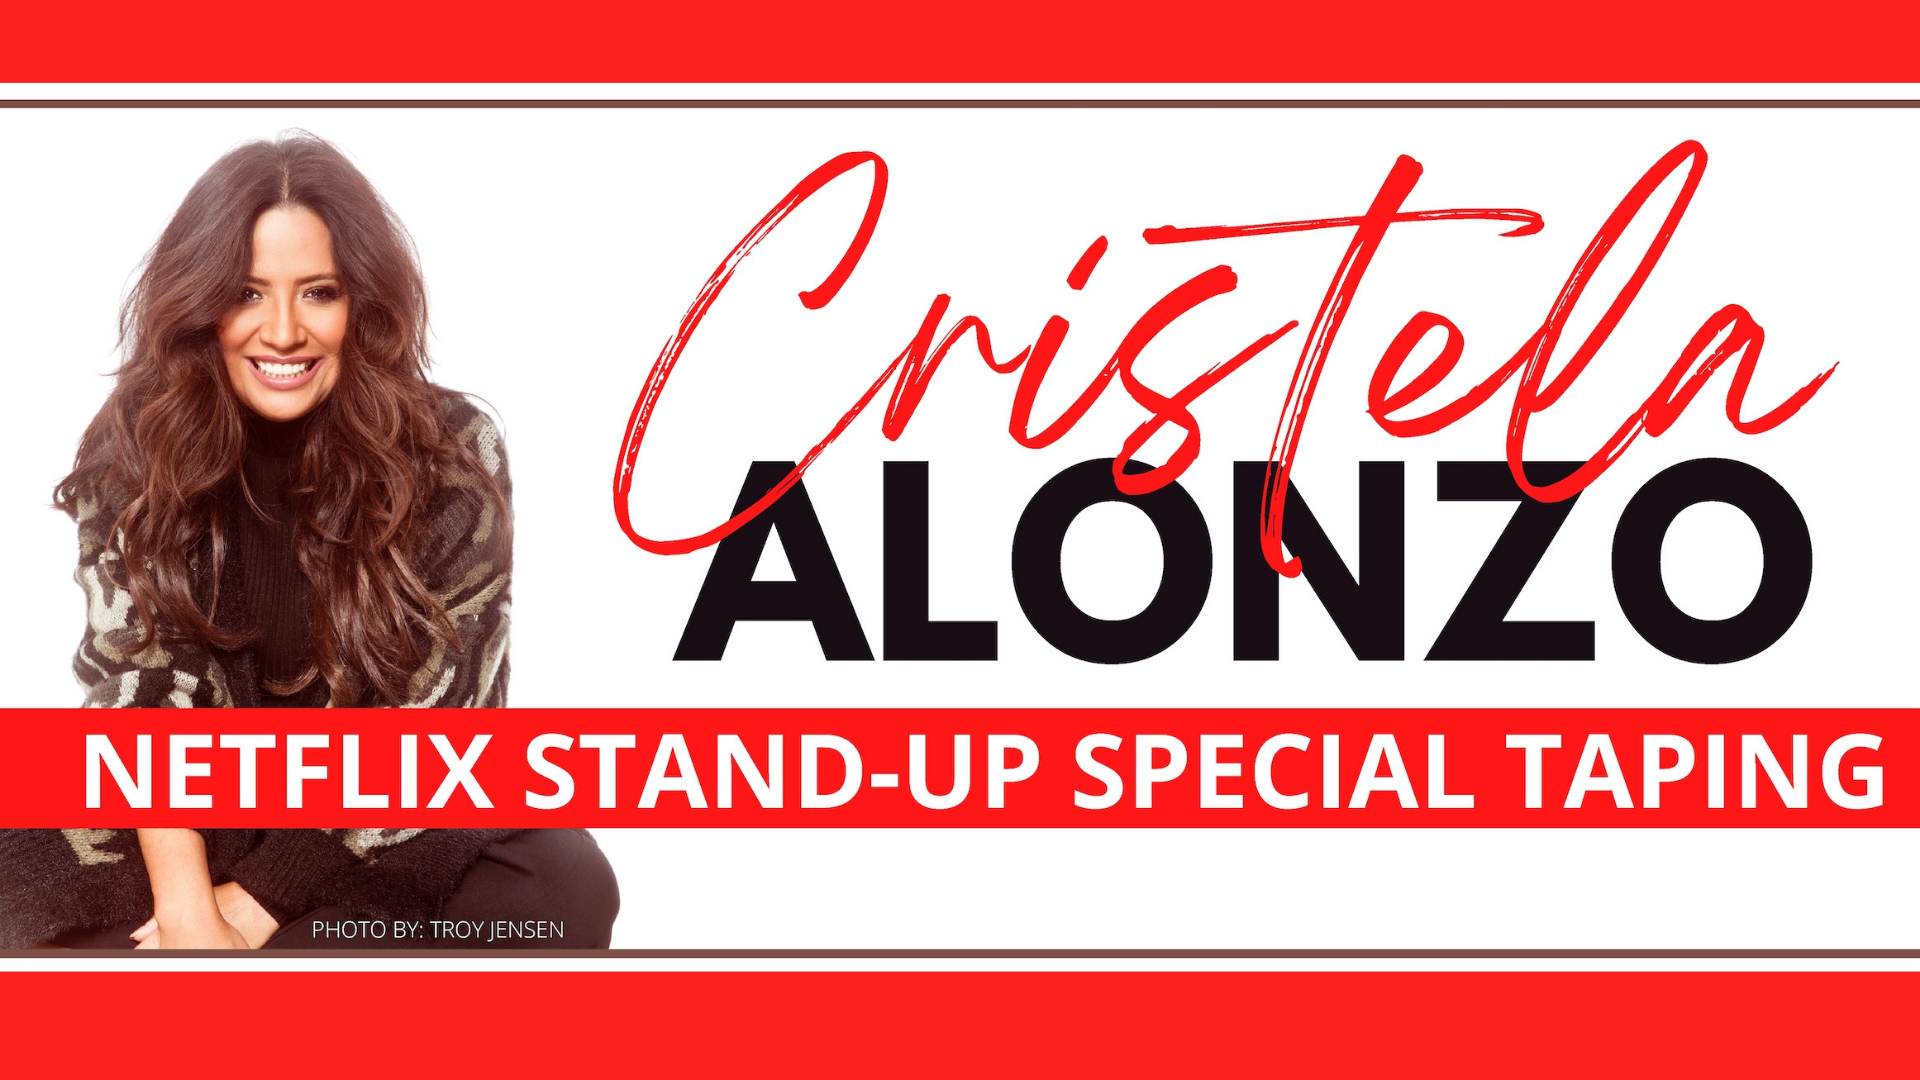 CRISTELA ALONZO'S &amp;quot;WE'LL NAME IT LATER&amp;quot; NETFLIX STANDUP SPECIAL TAPING